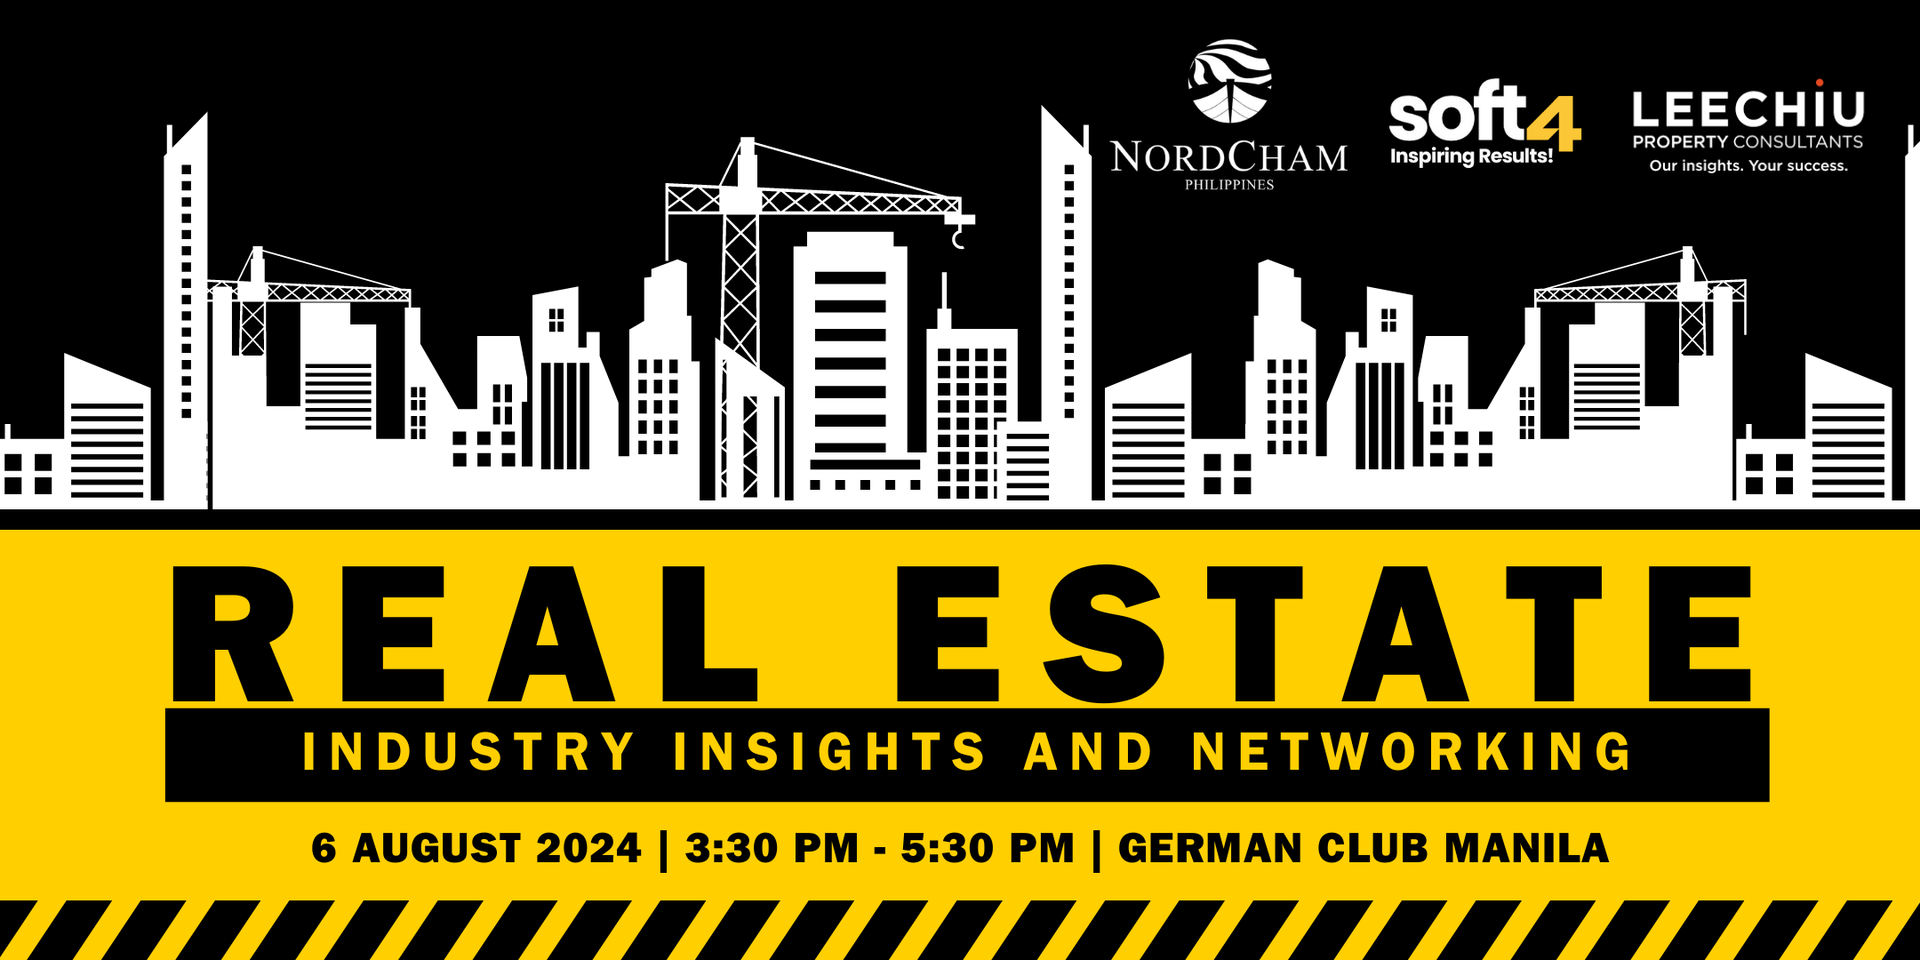 thumbnails REAL ESTATE INDUSTRY INSIGHTS AND NETWORKING | 6 AUGUST 2024 | GERMAN CLUB MANILA